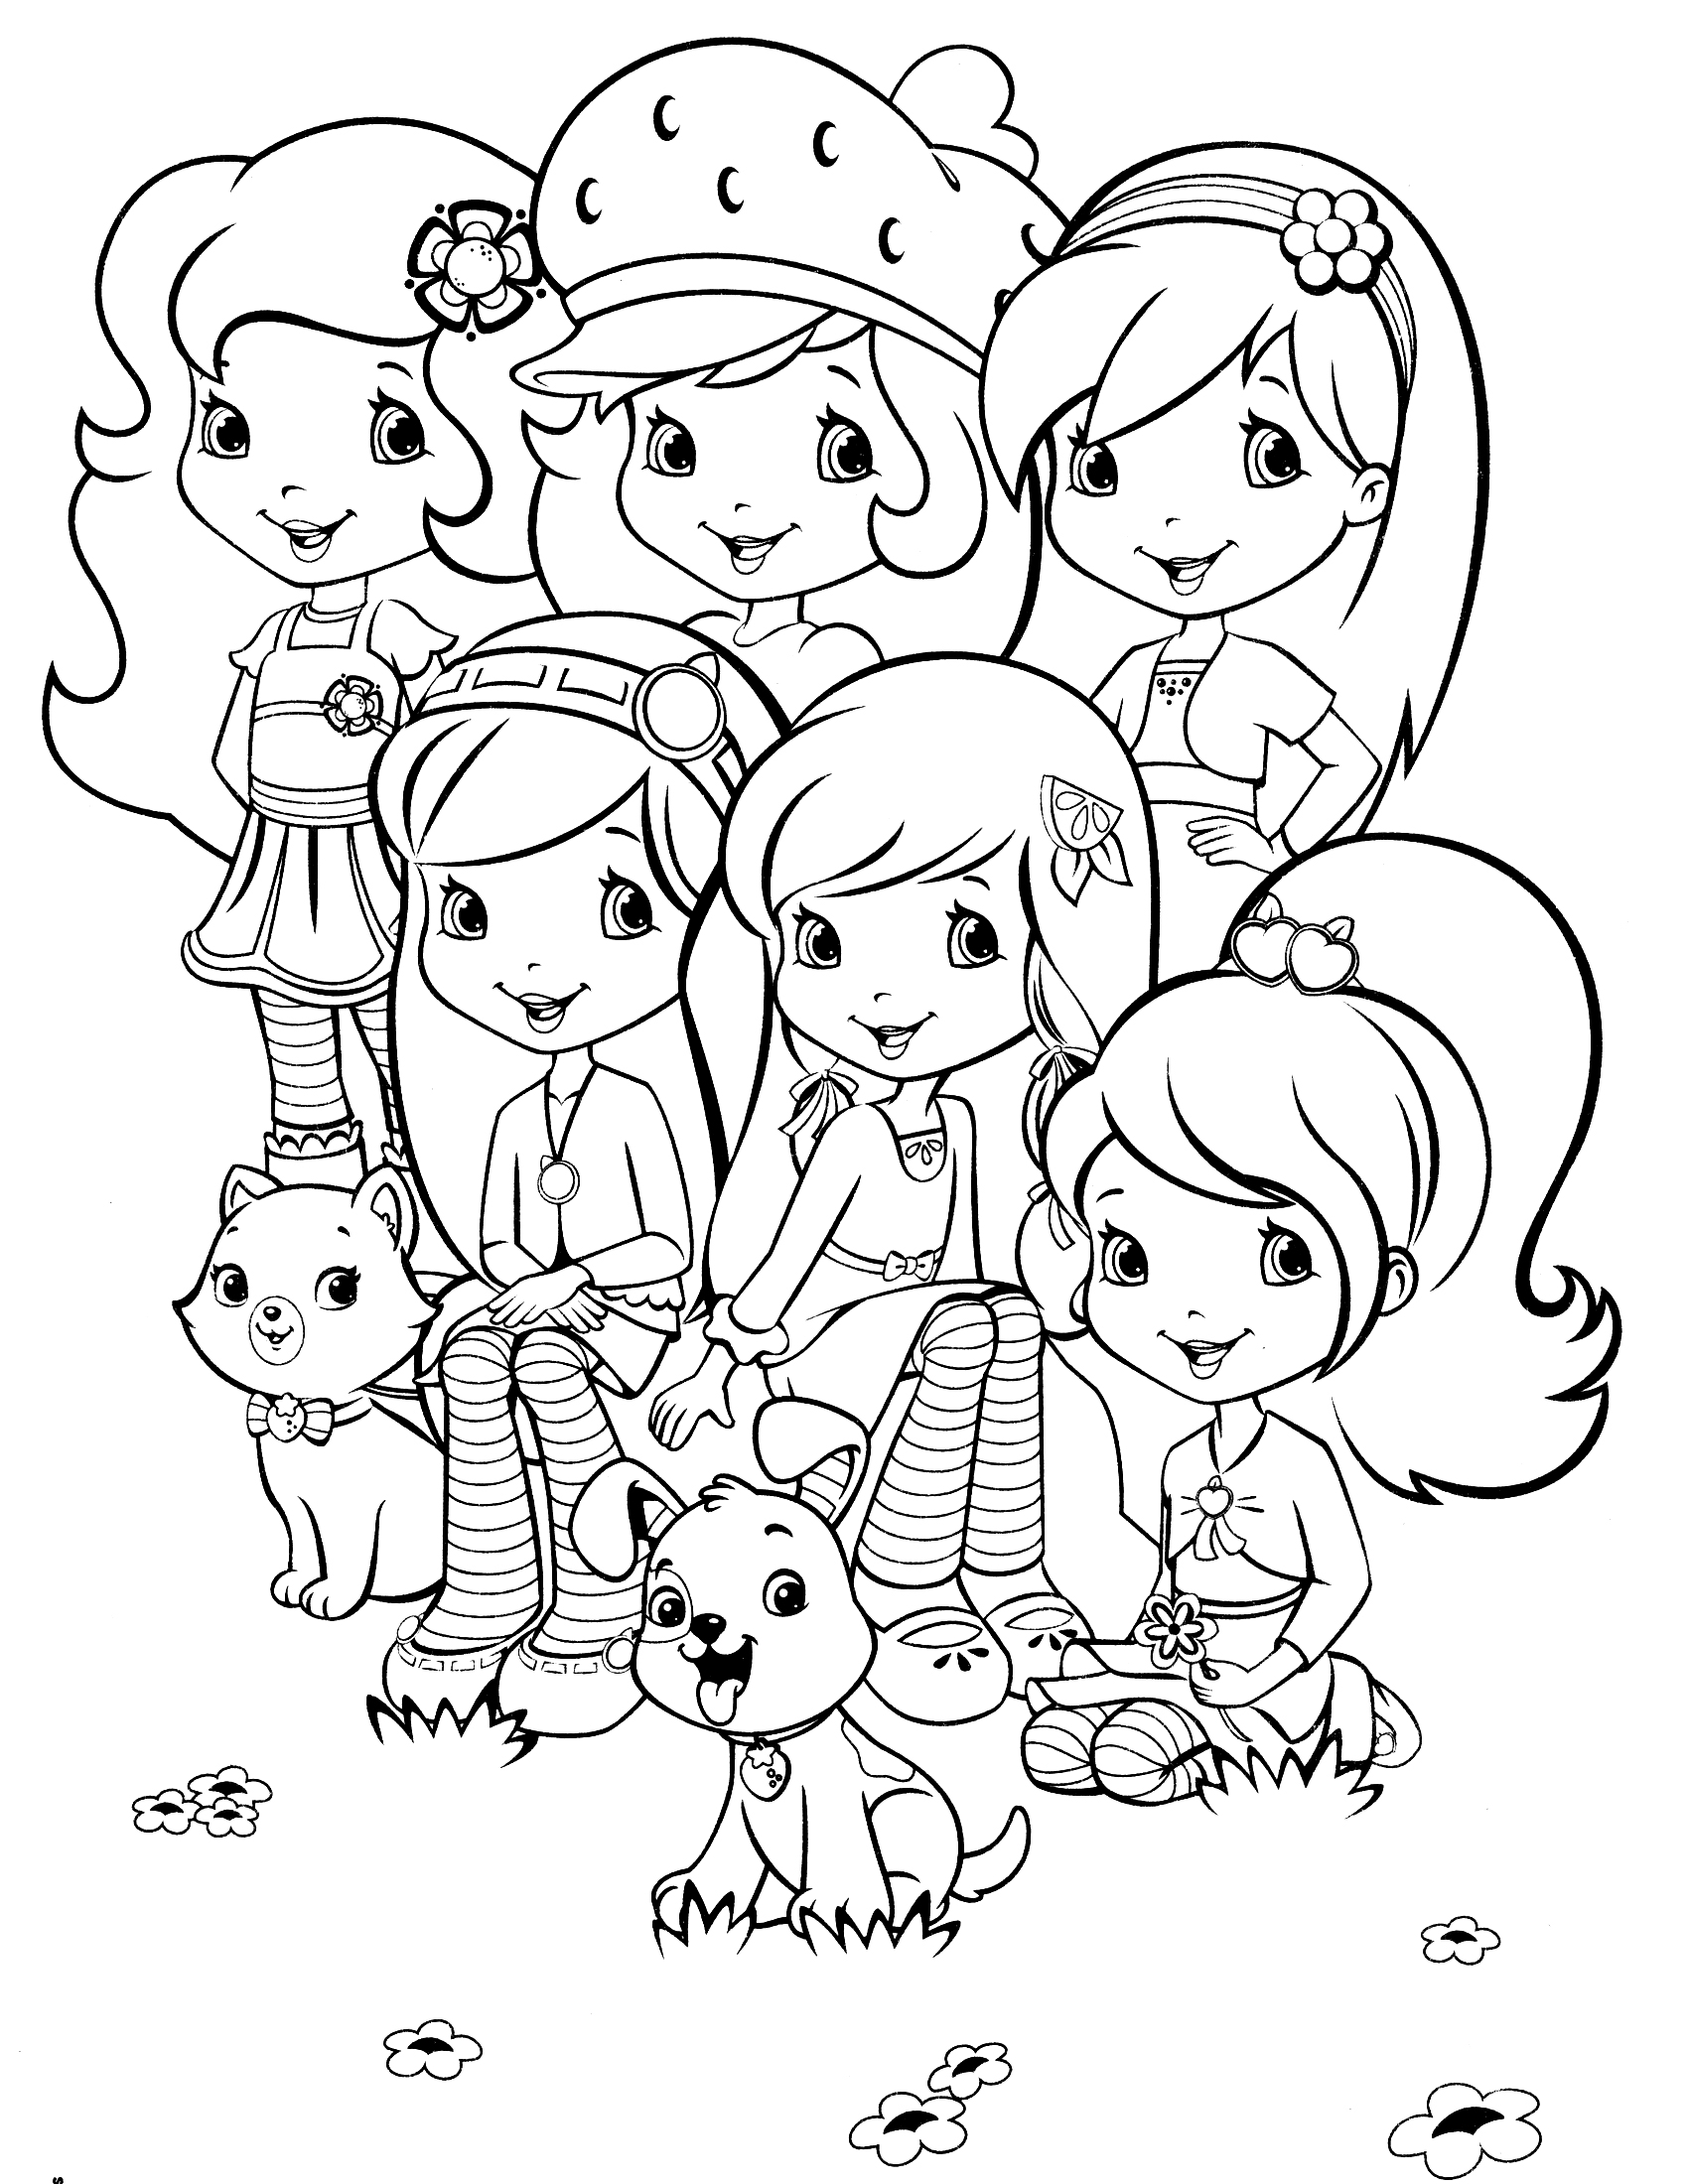 strawberry shortcake colouring pages to print 15 strawberry shortcake coloring pages free printable shortcake colouring to print strawberry pages 